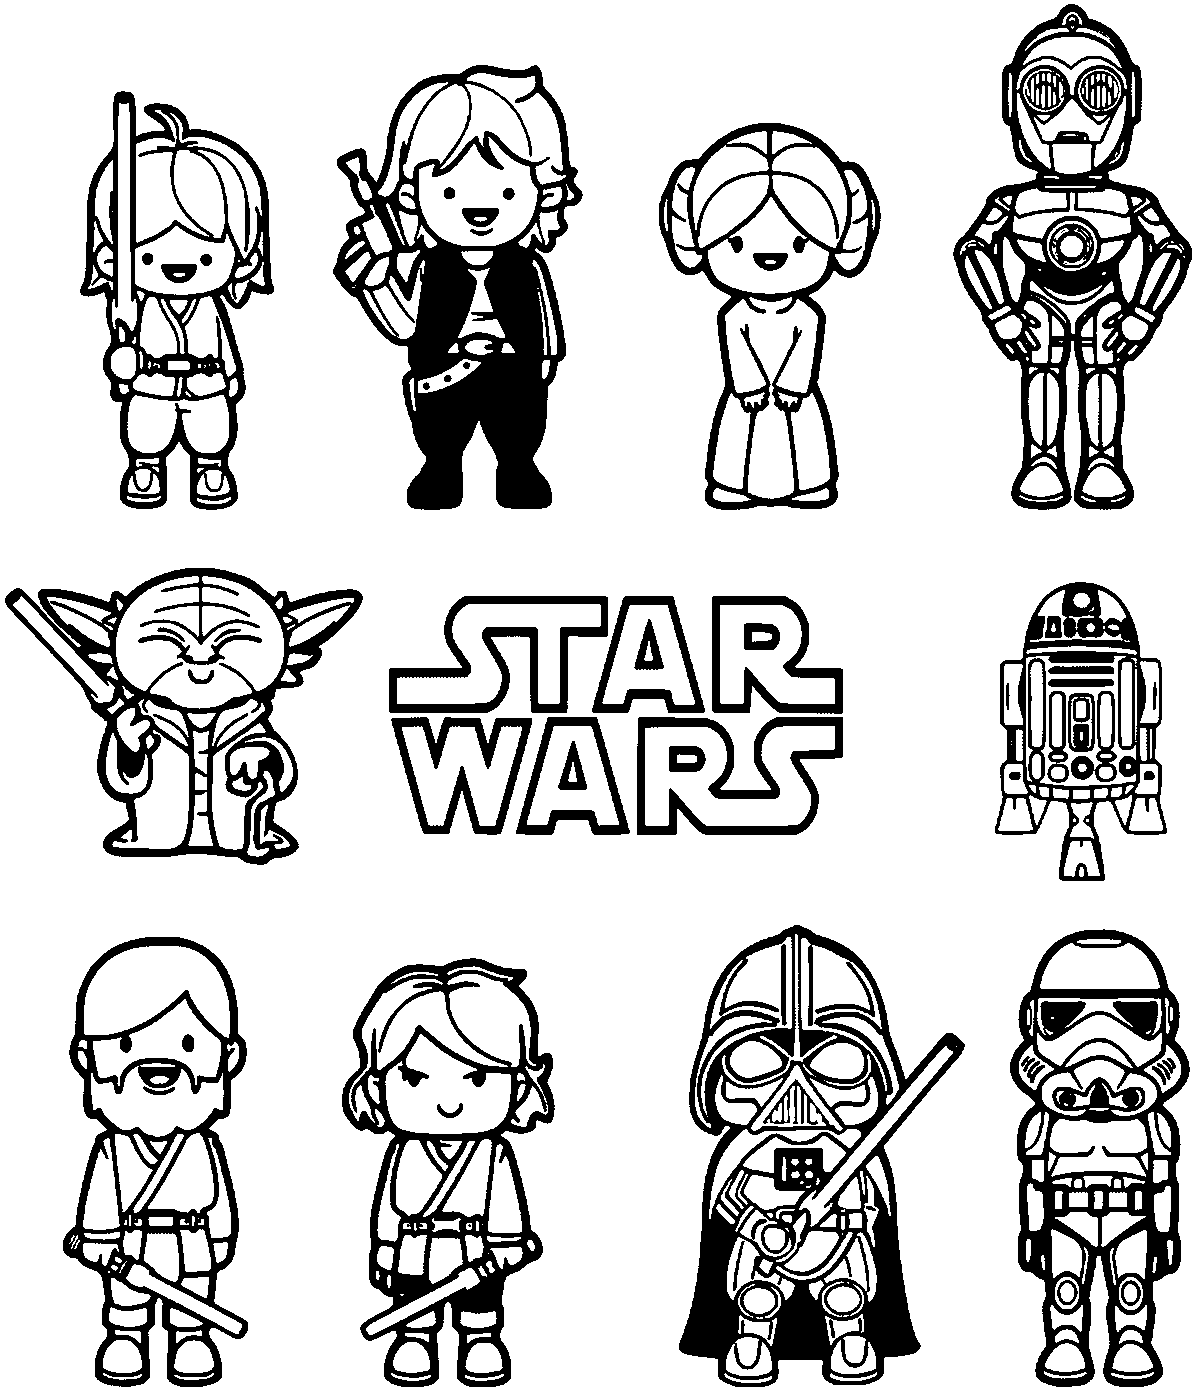 Star Wars Coloring Page (2) | Wecoloringpage